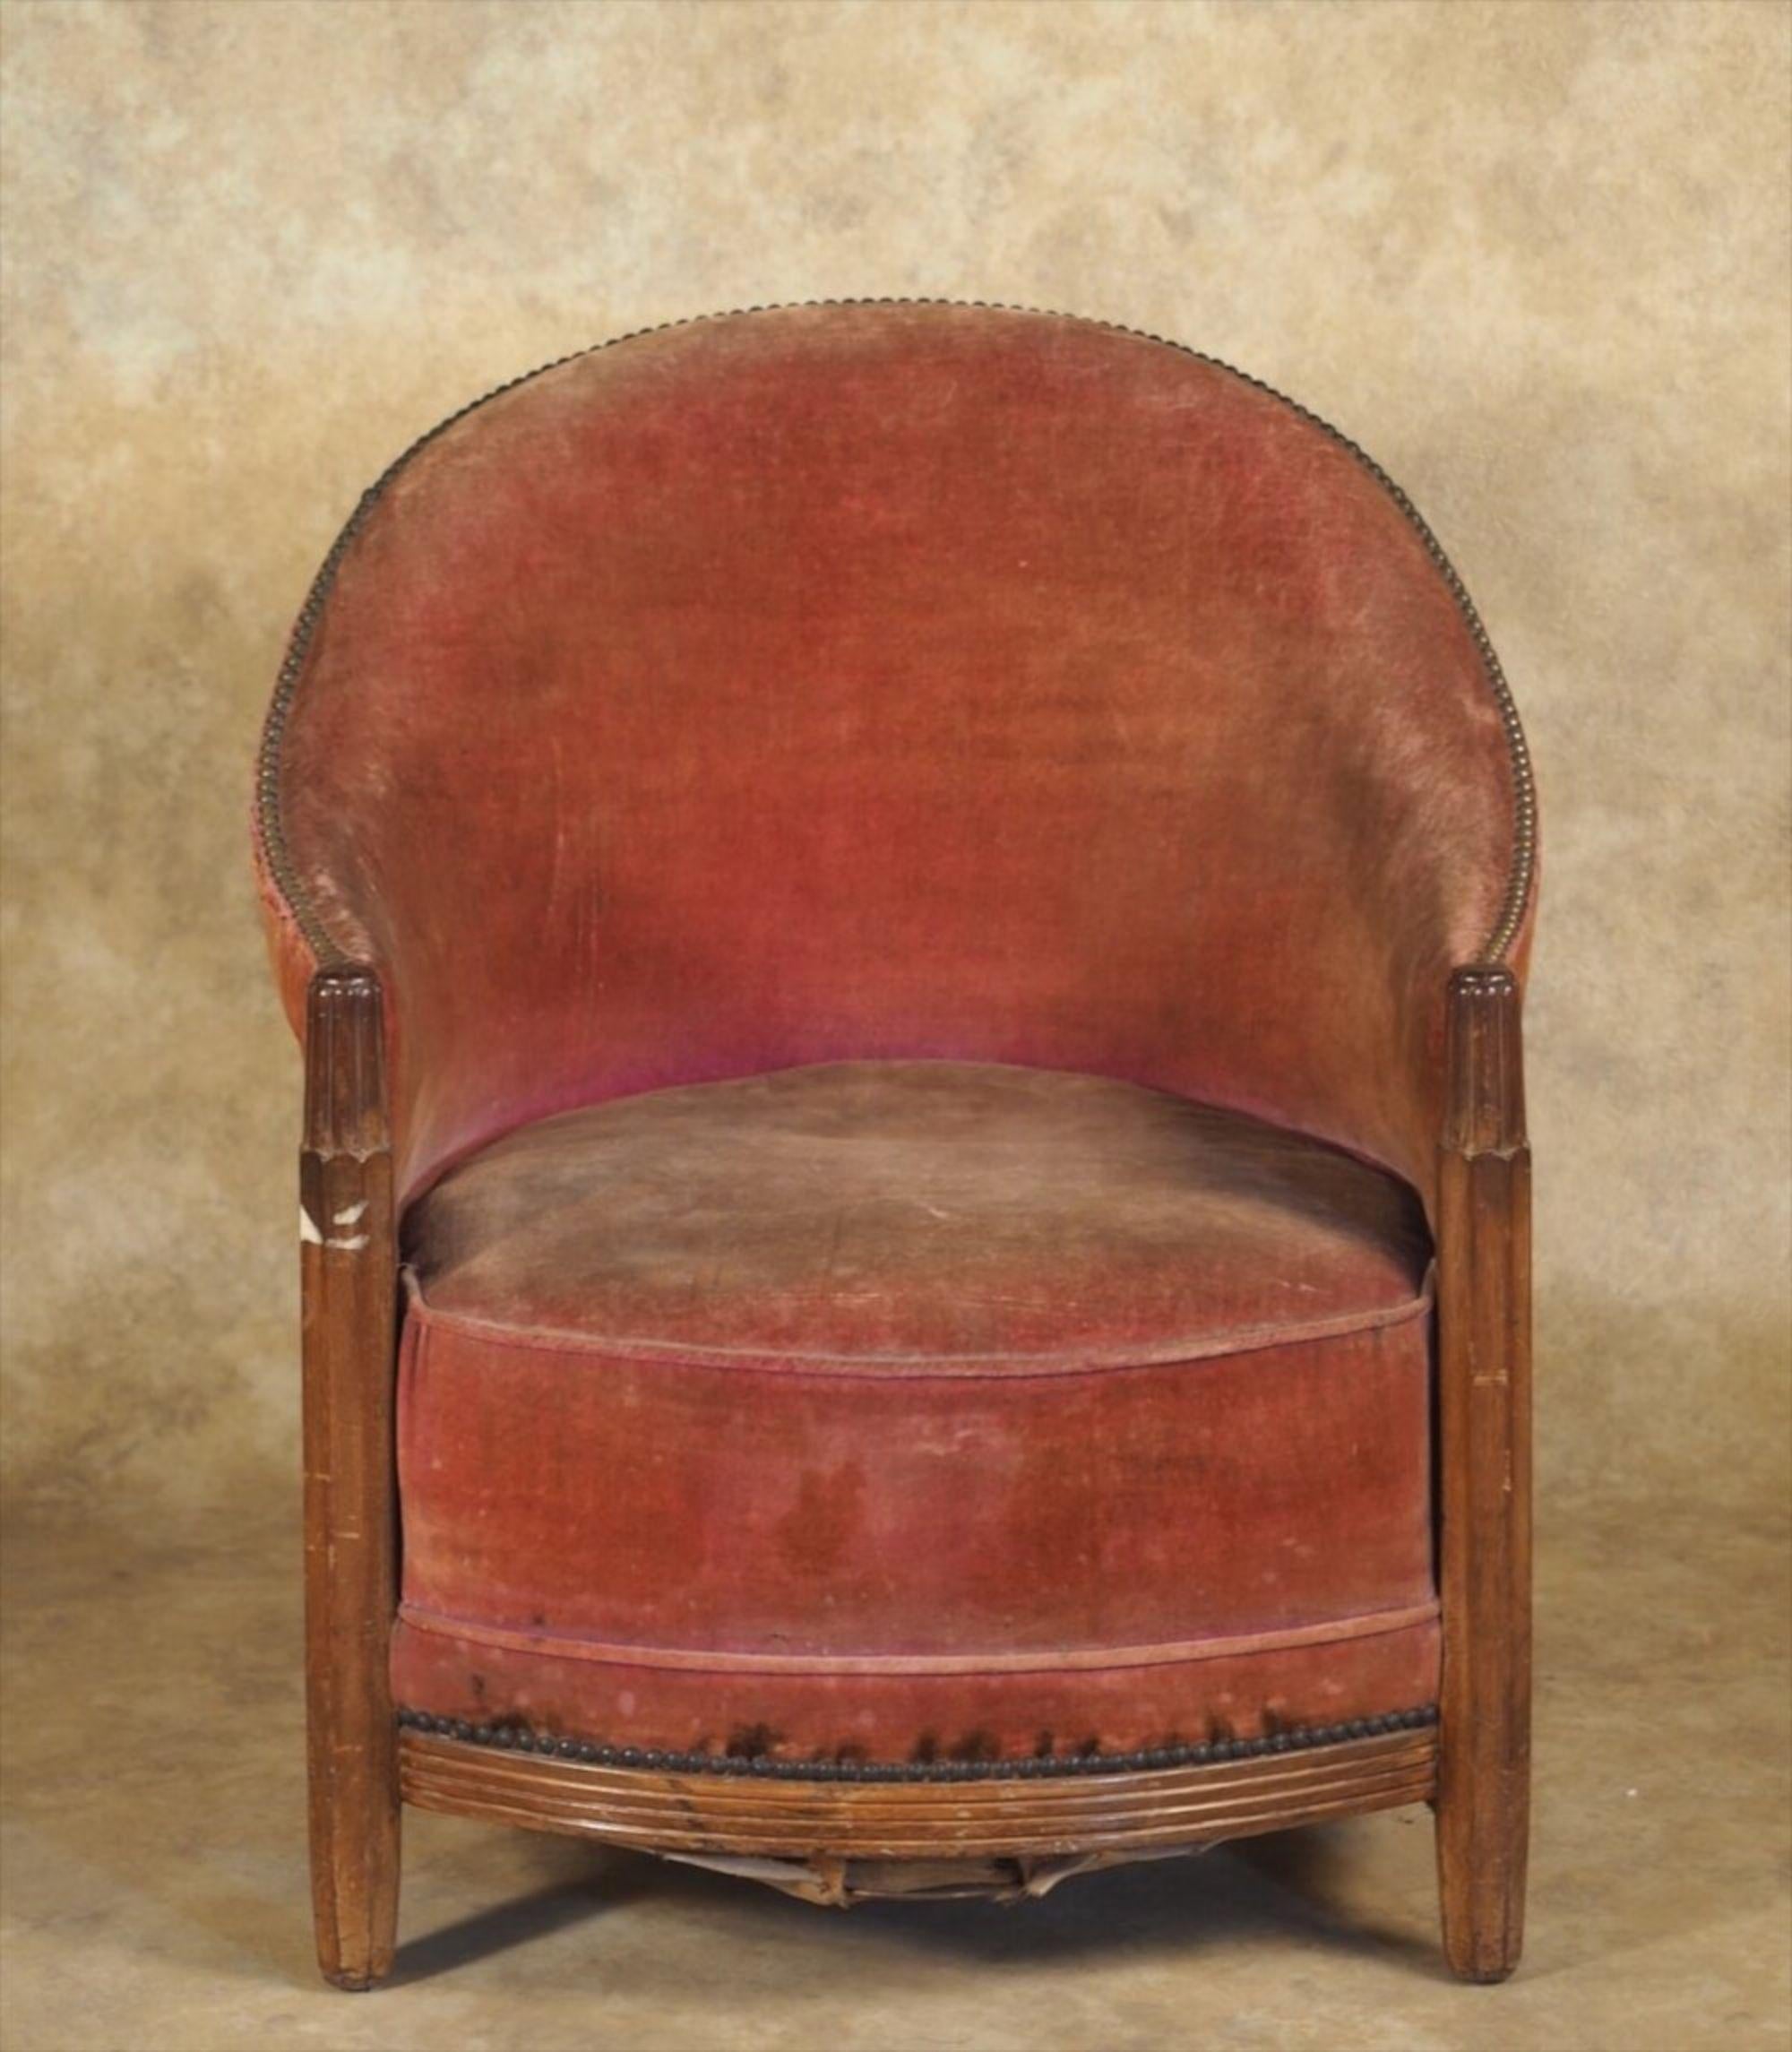 Classic French Art Deco boudoir chair by DIM (Joubert et Petit), circa 1925, pictured in the DIM period catalog.

Unrestored in the photographs. Pricing includes restoration, refinishing, and reupholstering using client supplied